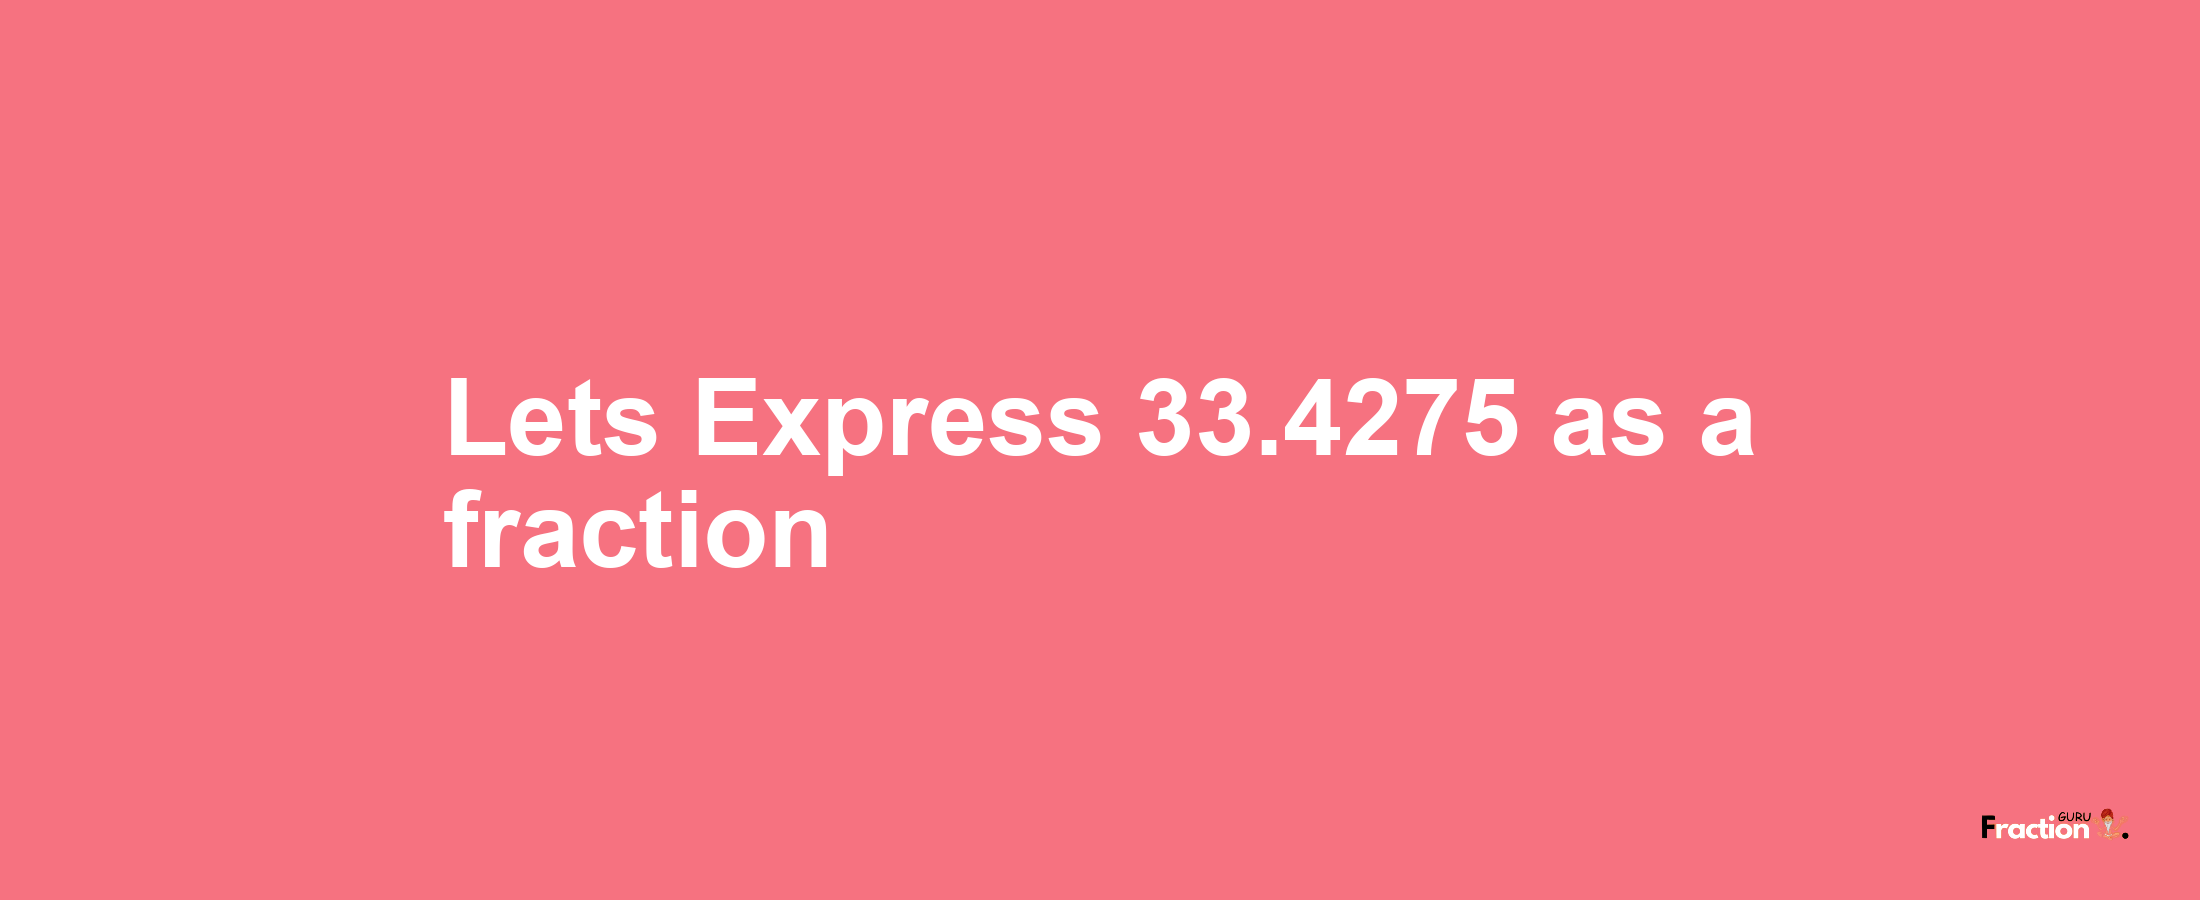 Lets Express 33.4275 as afraction